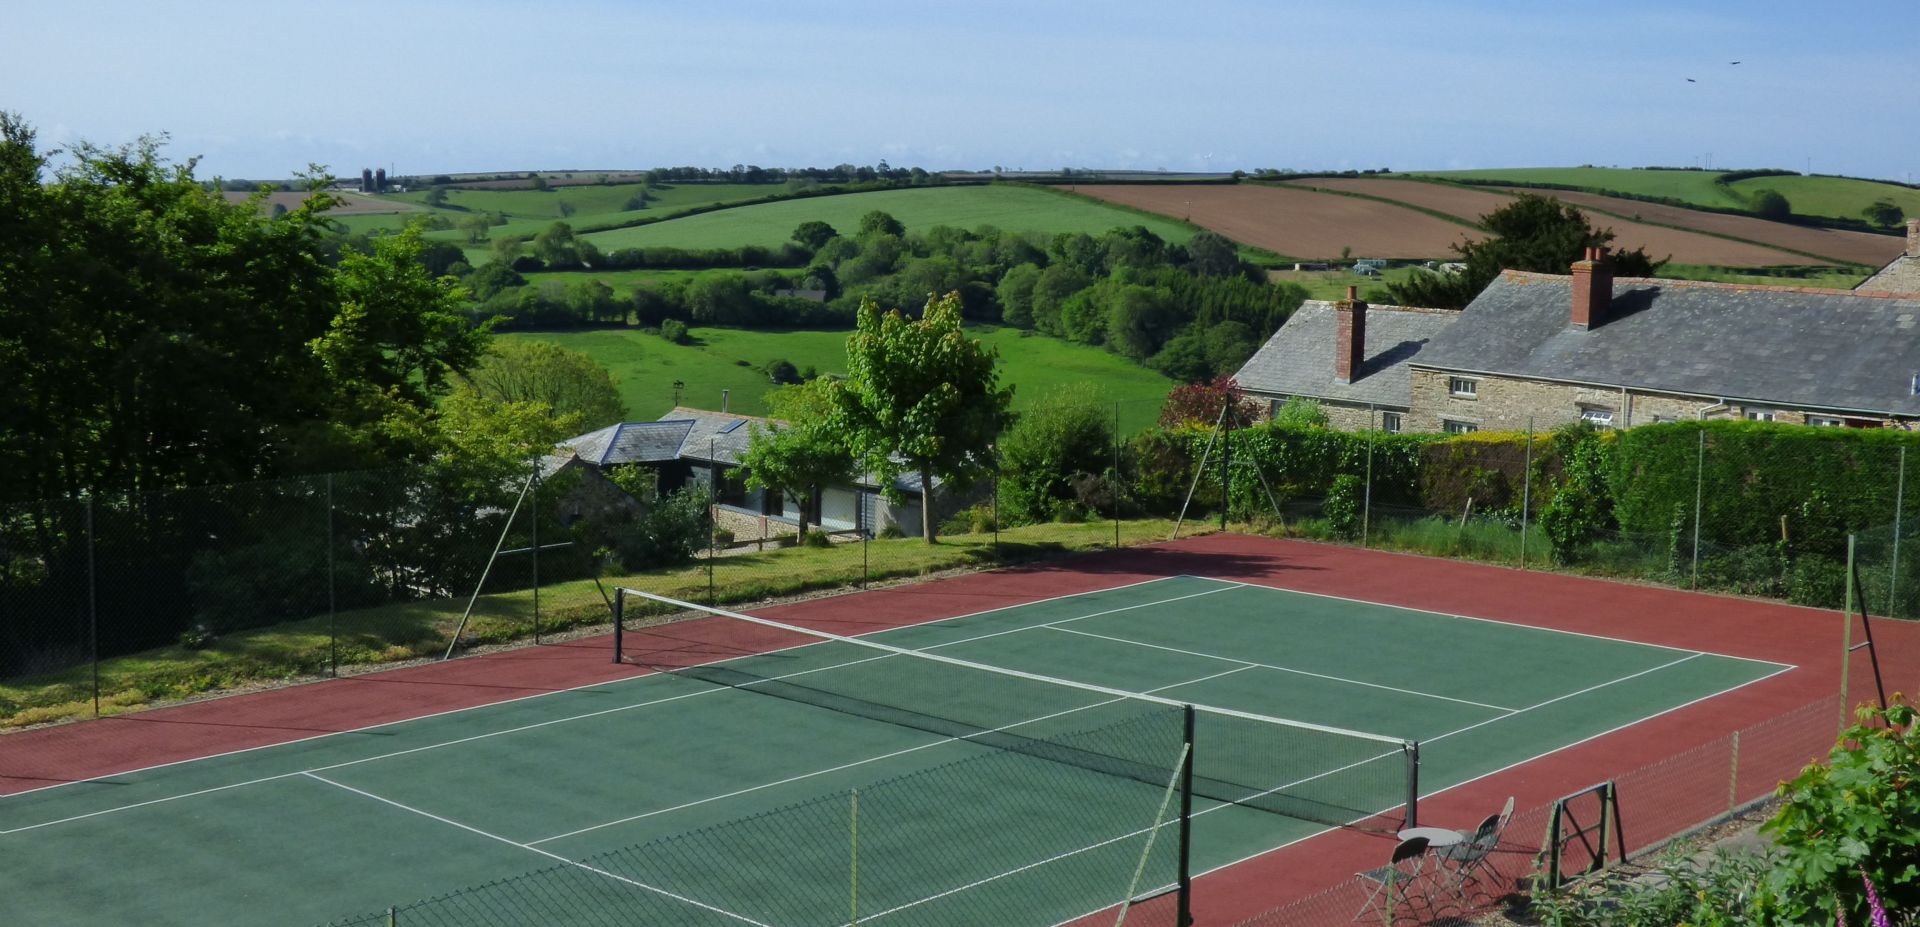 Holidays with tennis in Cornwall